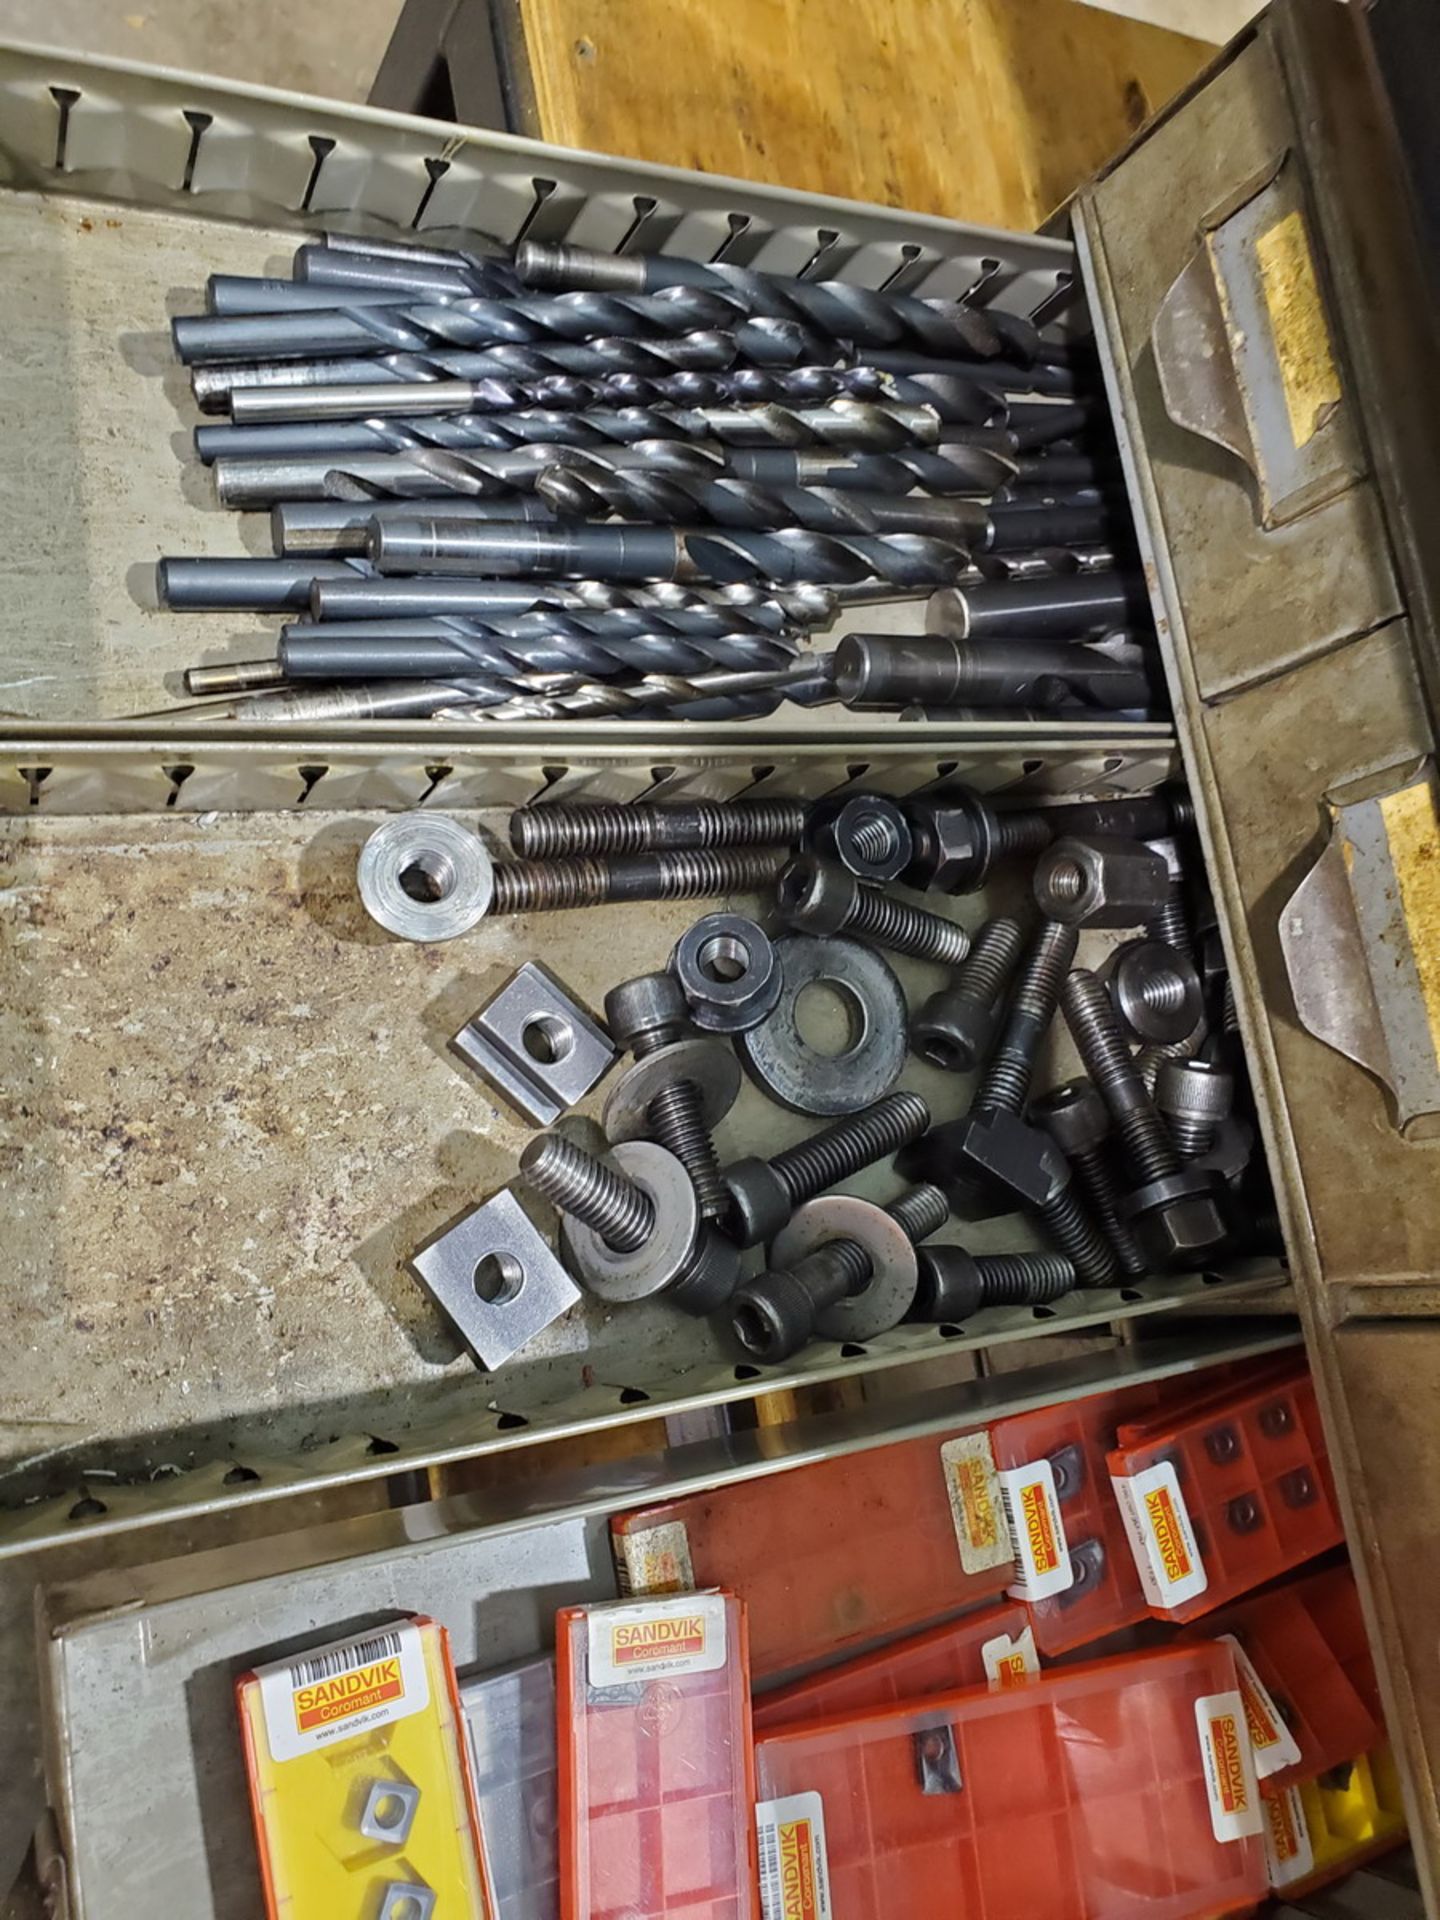 Assorted Matl. To Include But Not Limited To: Drill bits, Carbide Inserts, W/ Parts Bin, etc. - Image 8 of 13